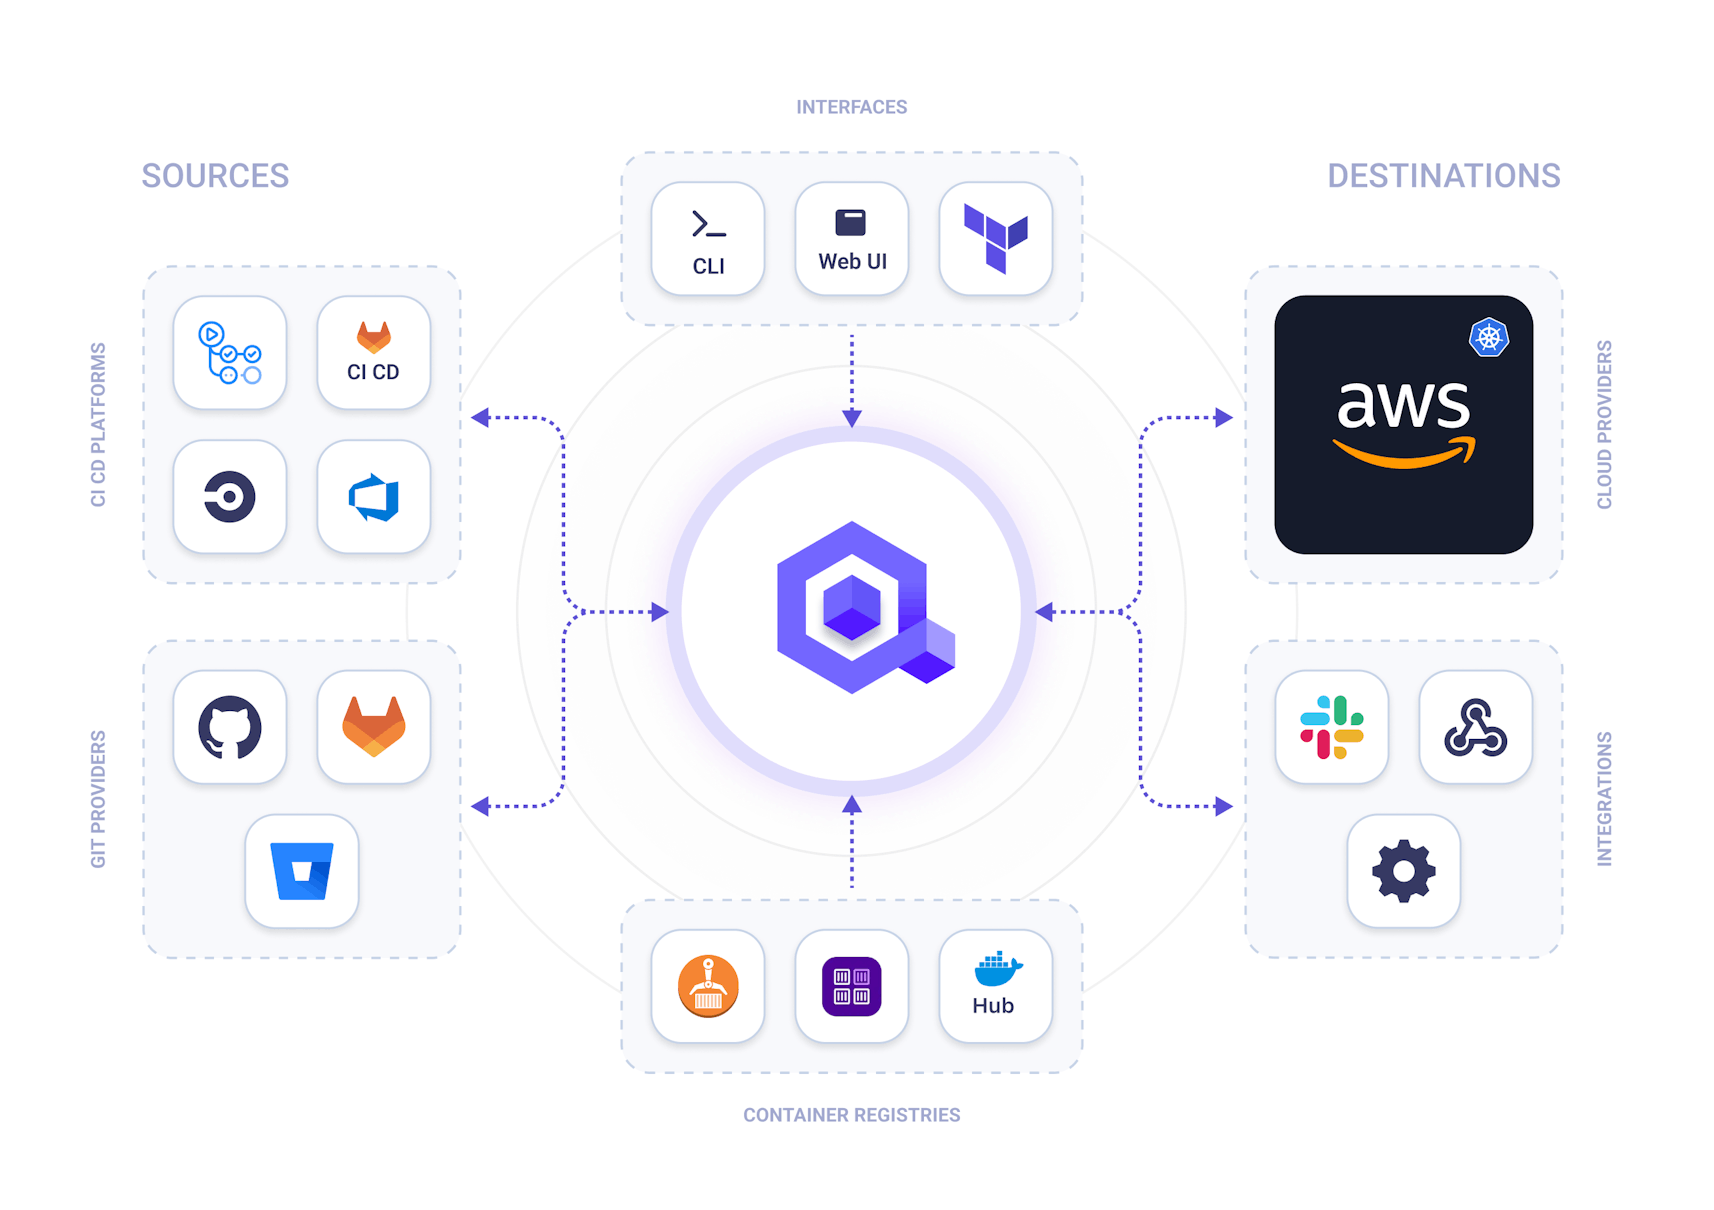 Qoverys integrates into GitHub, GitLab, BitBucket, any CI/CD platform, but is also usable from a web interface, CLI, API and even a Terraform Provider for the most advanced users